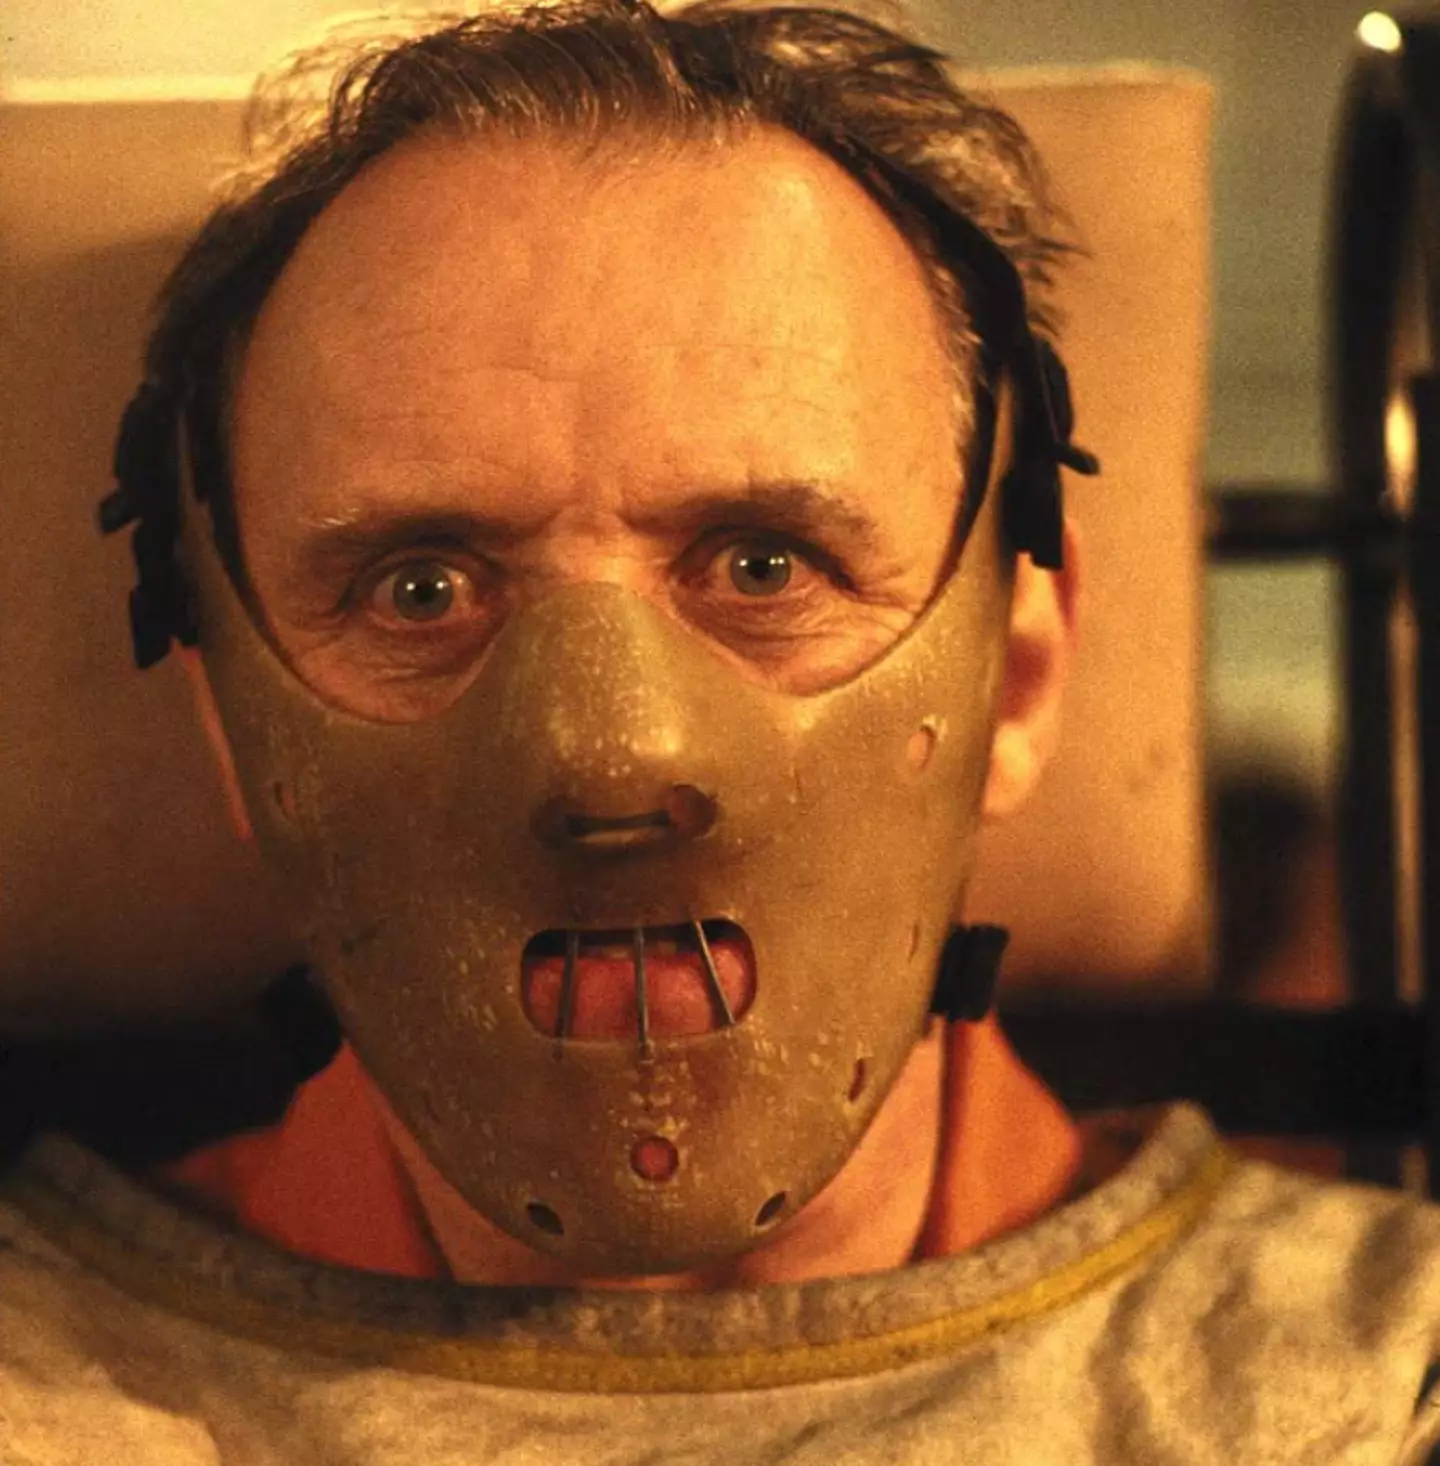 Hannibal Lecter didn't make the cut for the study.